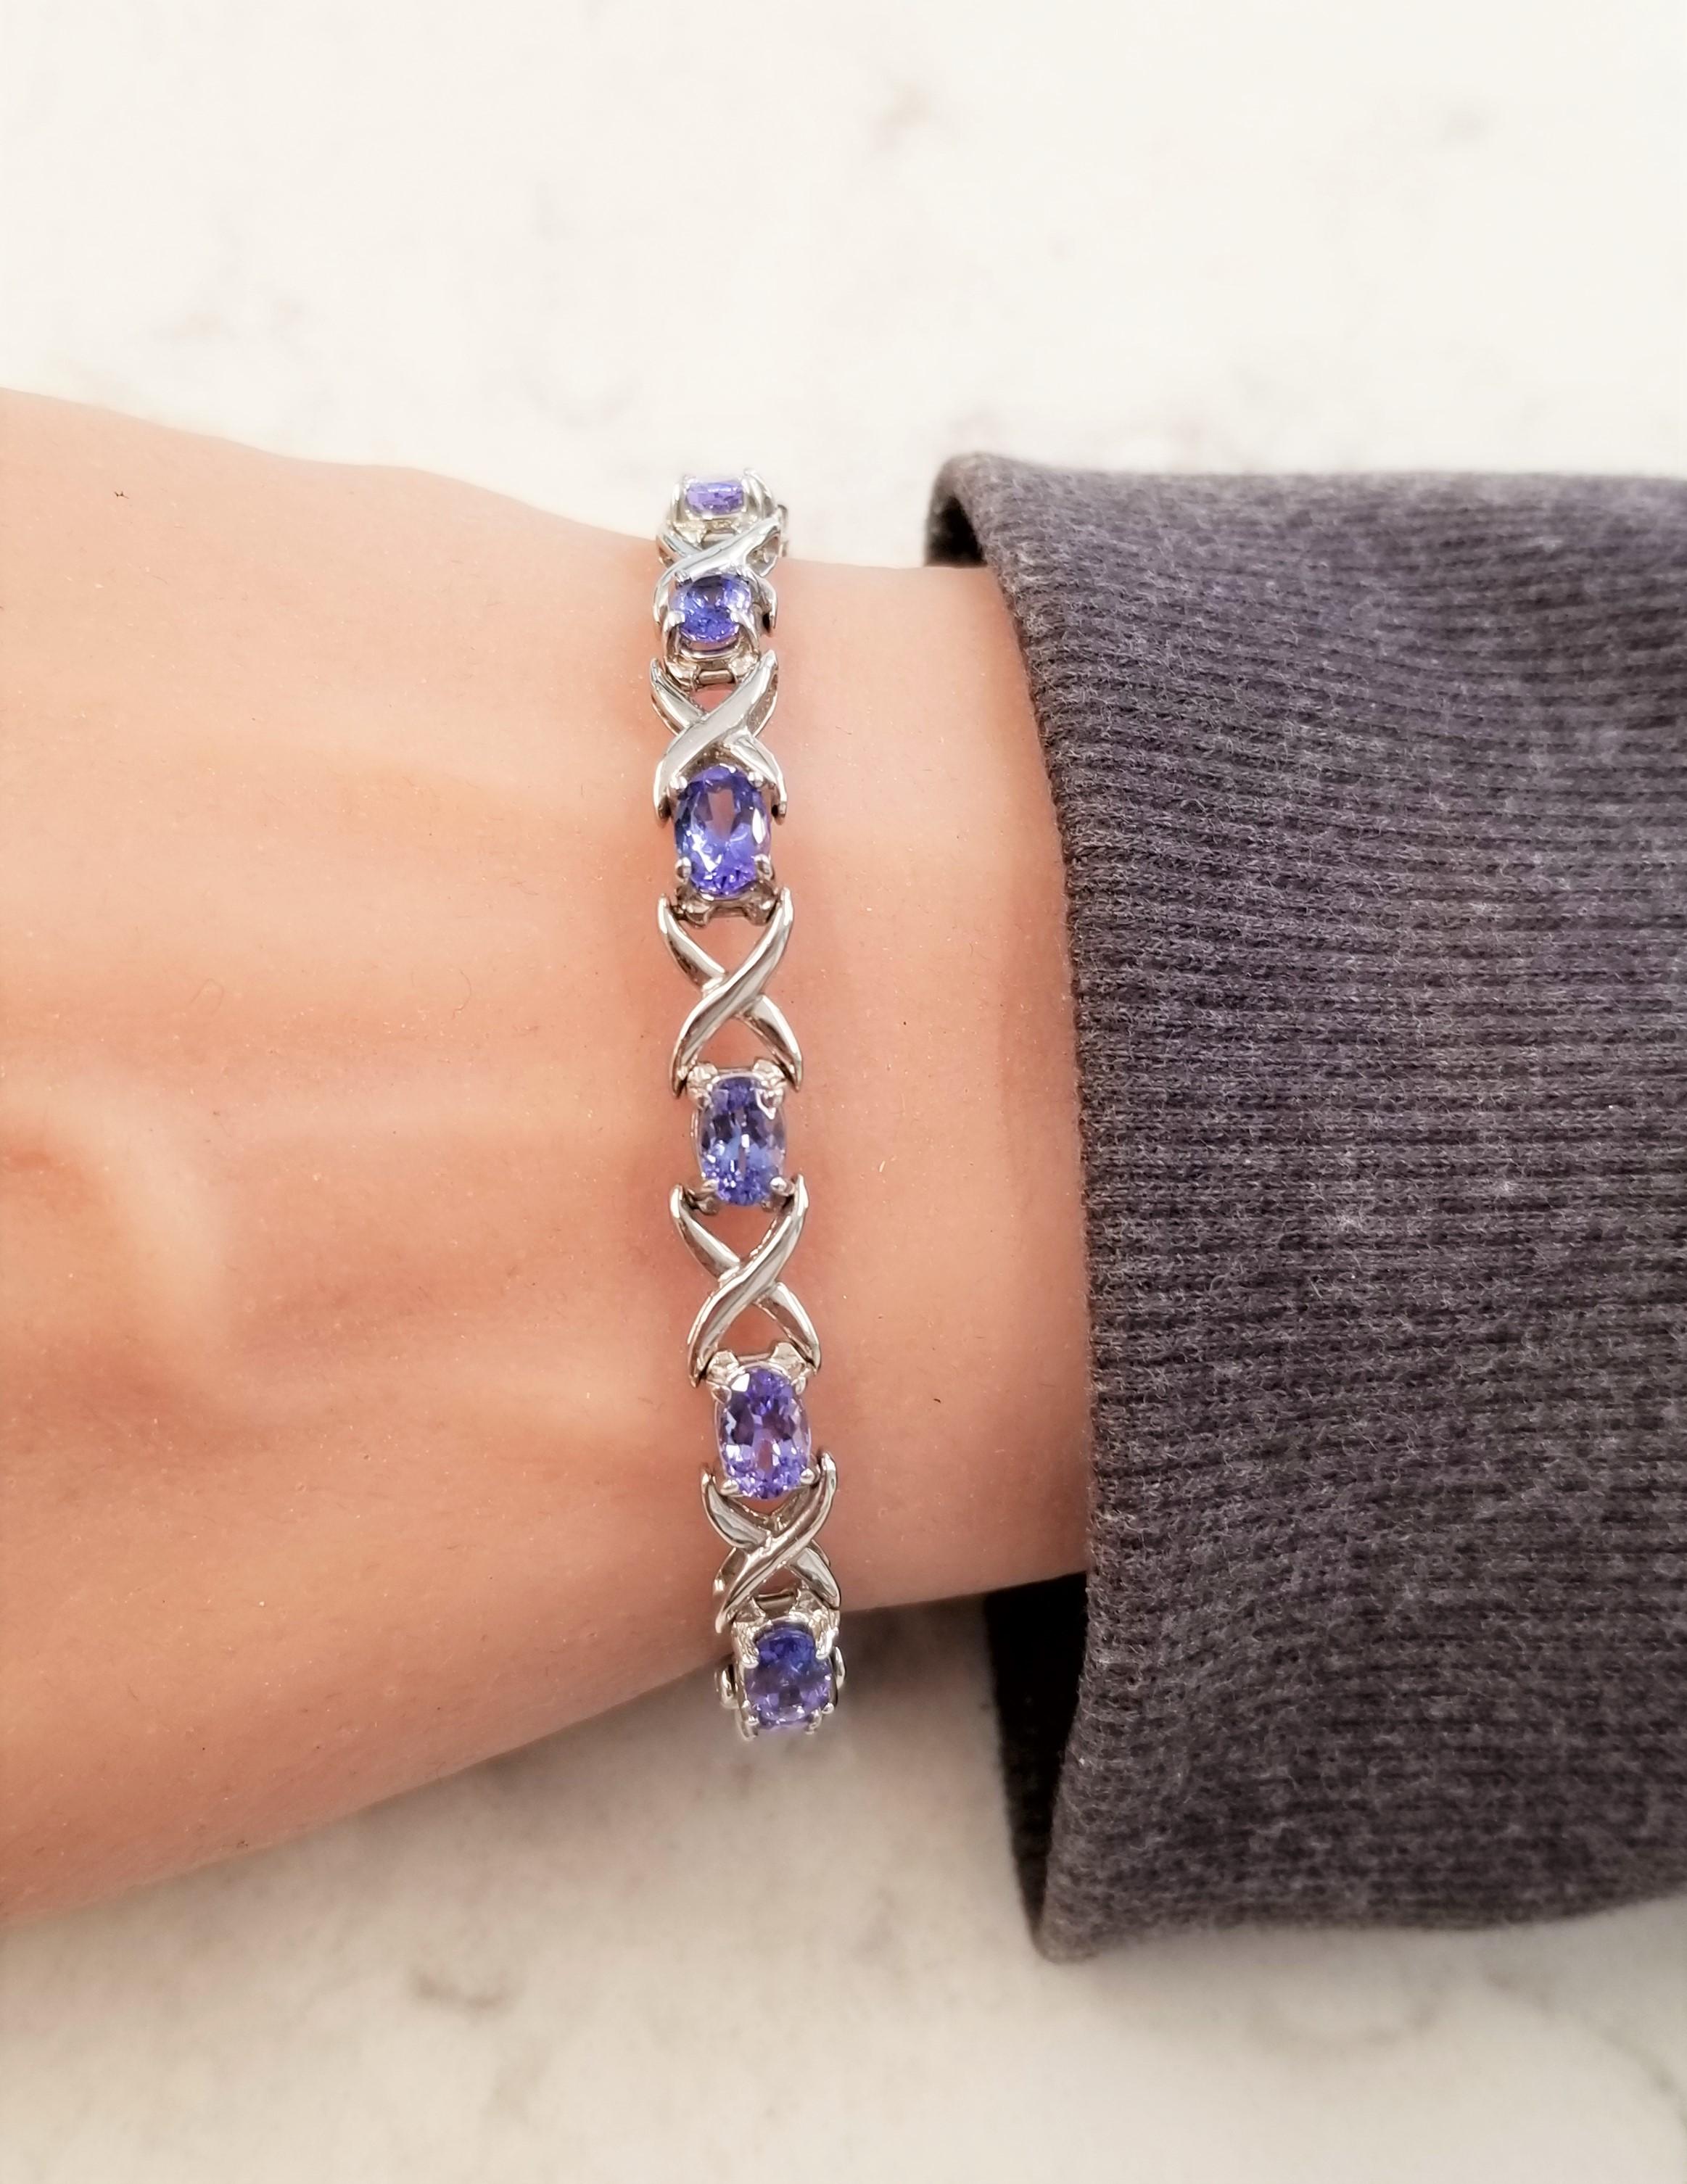 Welcome to the gemstone twist on a love bracelet. Tanzanites laid out in east-west orientation to create this exceptional bracelet. The richly violet & purple gems in a distinctively designed 14 Karat white gold “X” mounting is attractive and